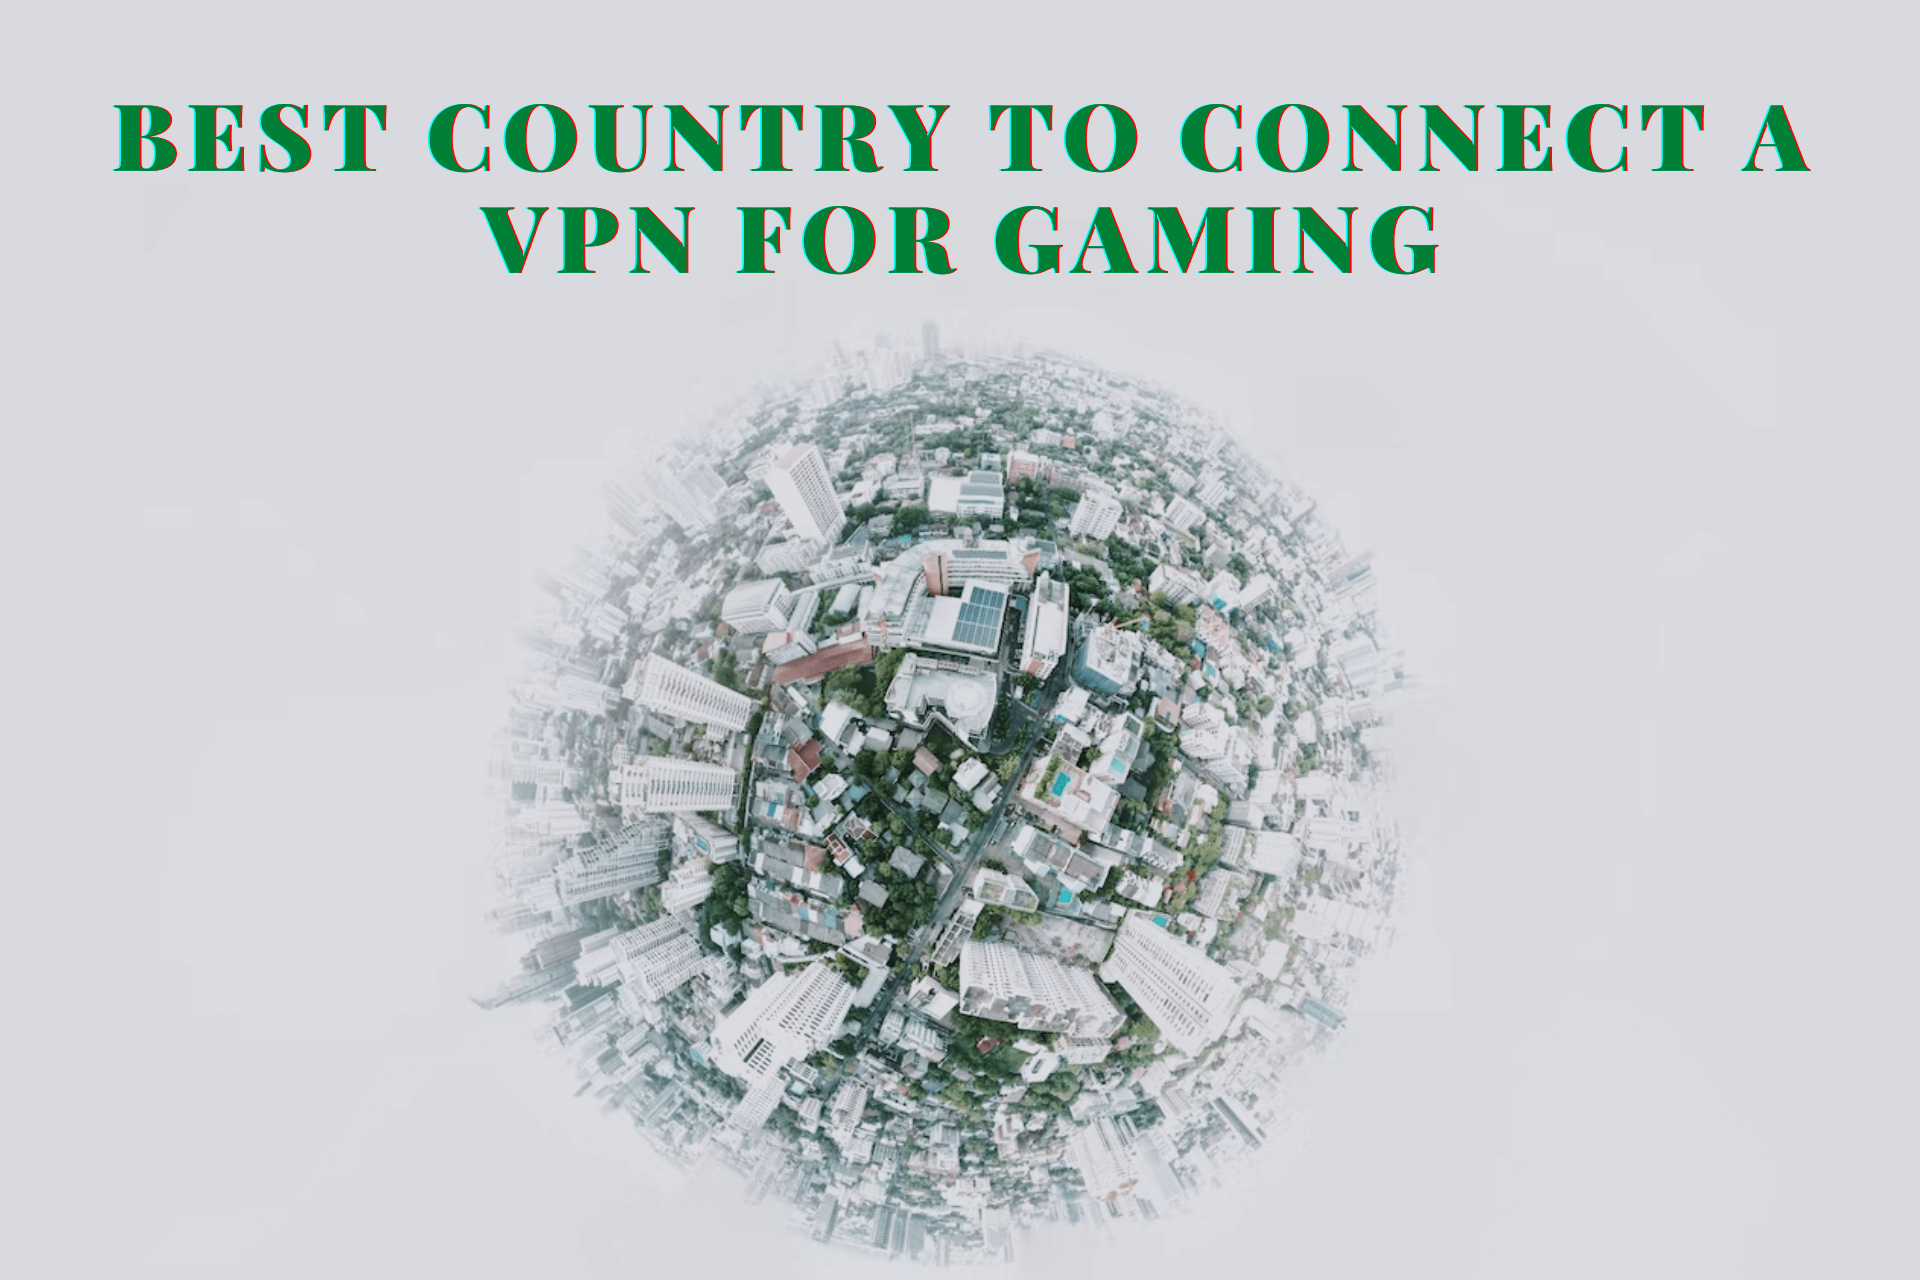 Best Country to Connect VPN for Gaming